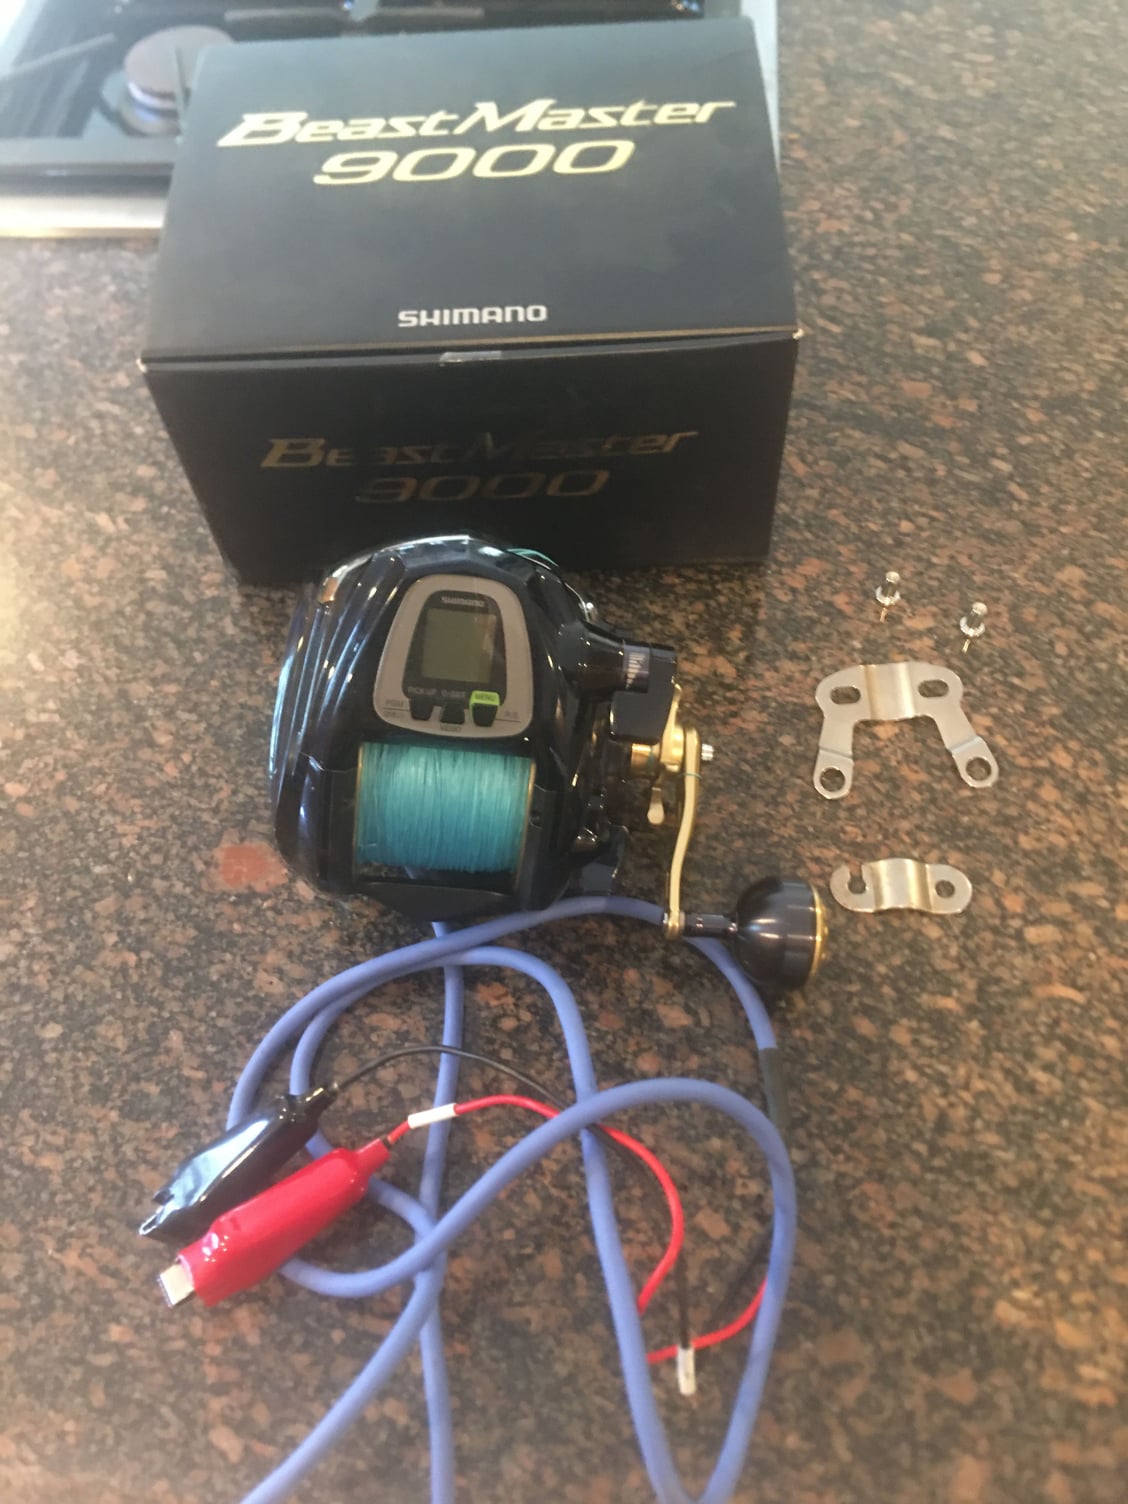 Shimano Beastmaster 9000 Like New - The Hull Truth - Boating and Fishing  Forum